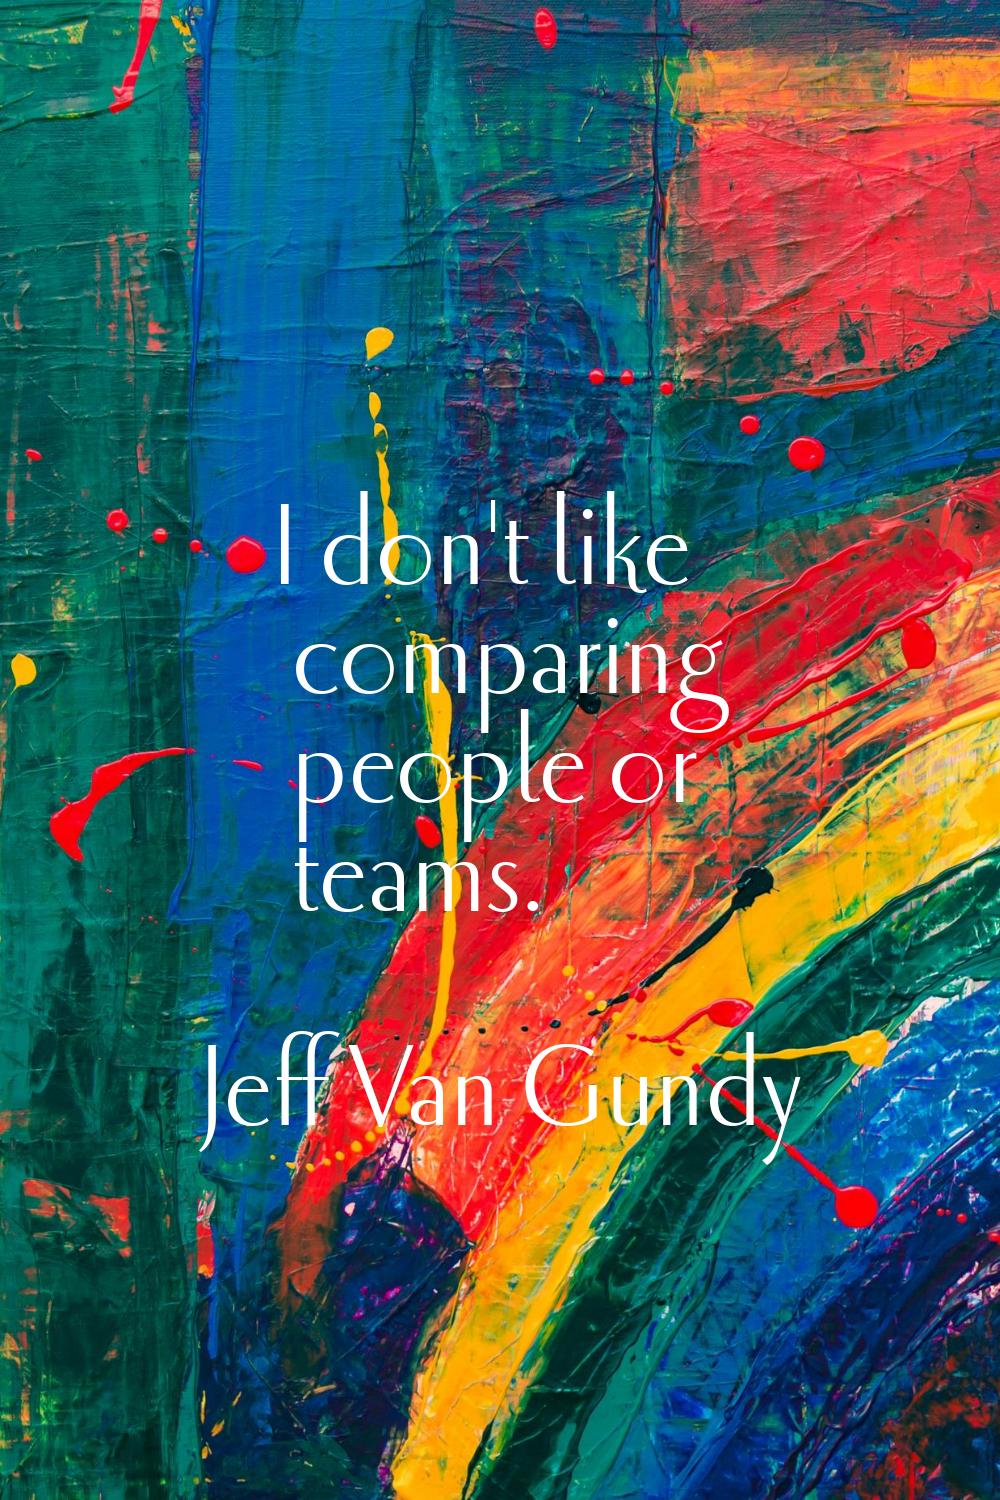 I don't like comparing people or teams.